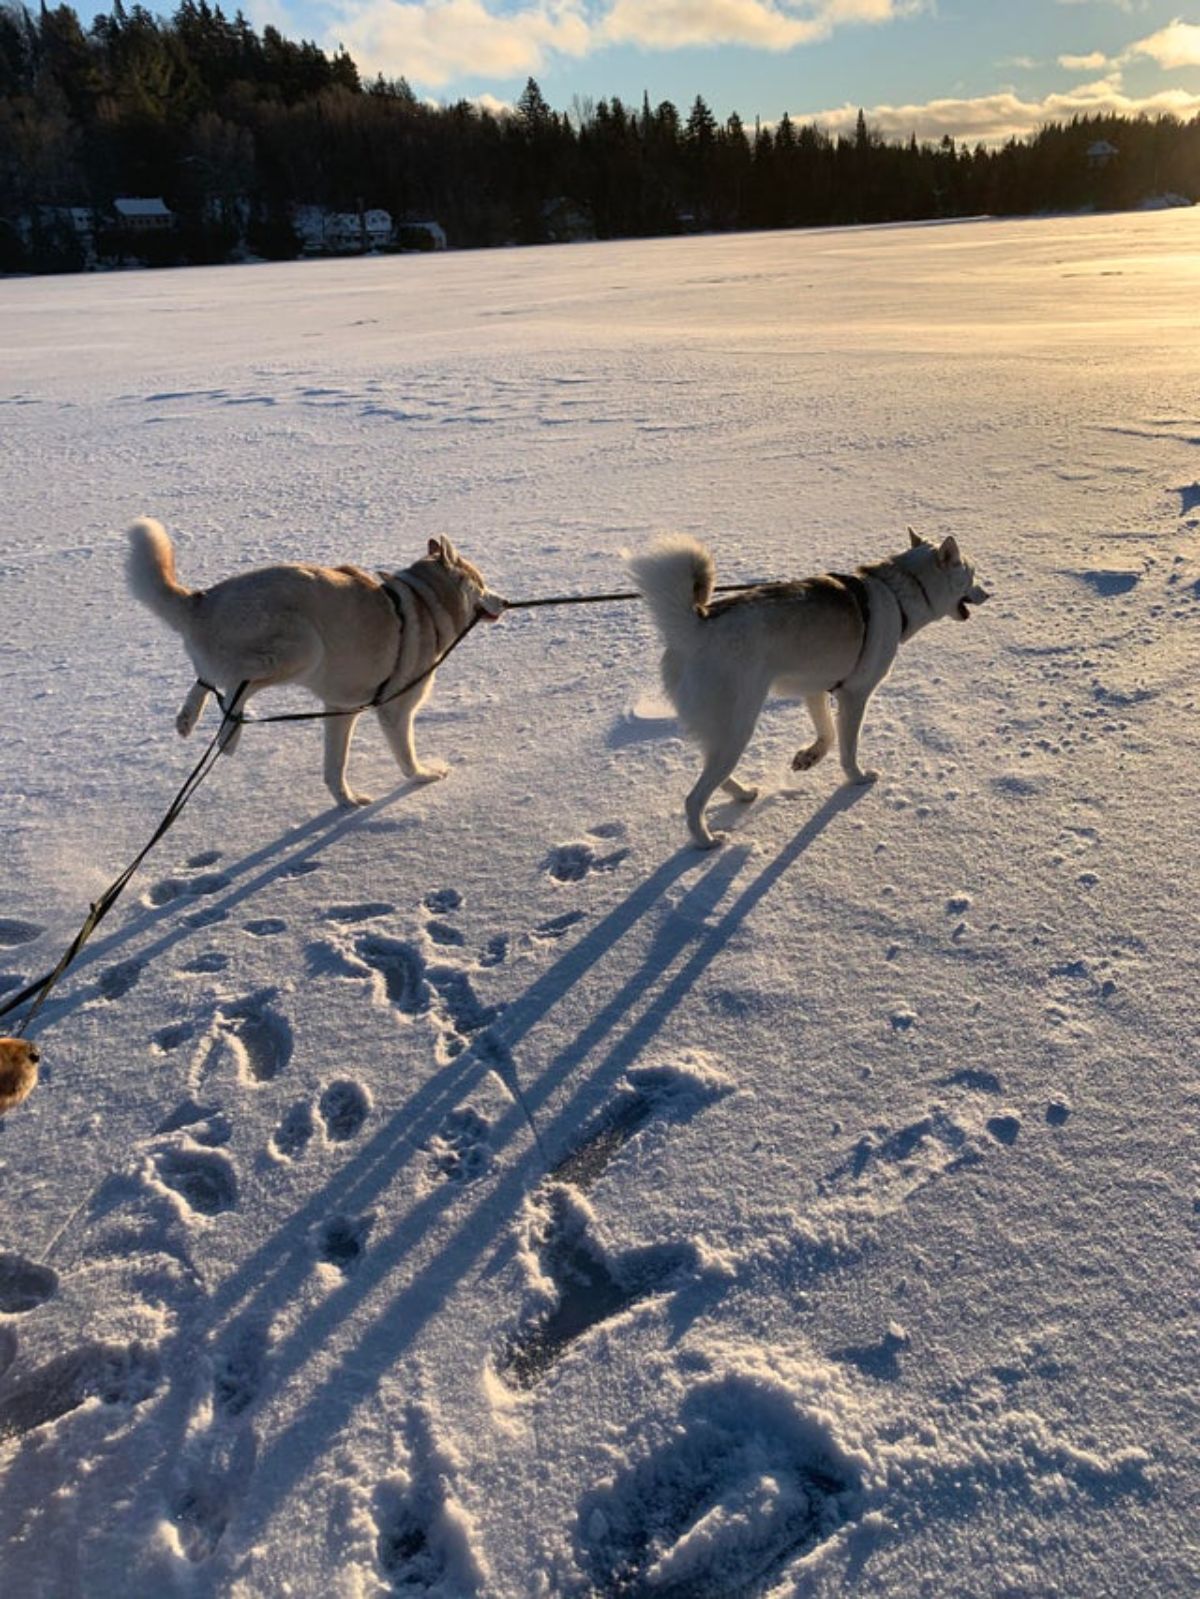 2 brown and white huskies walking on snow connected to each other by a rope and the second dog has its back legs tangled in the rope and the legs are lifted off the ground